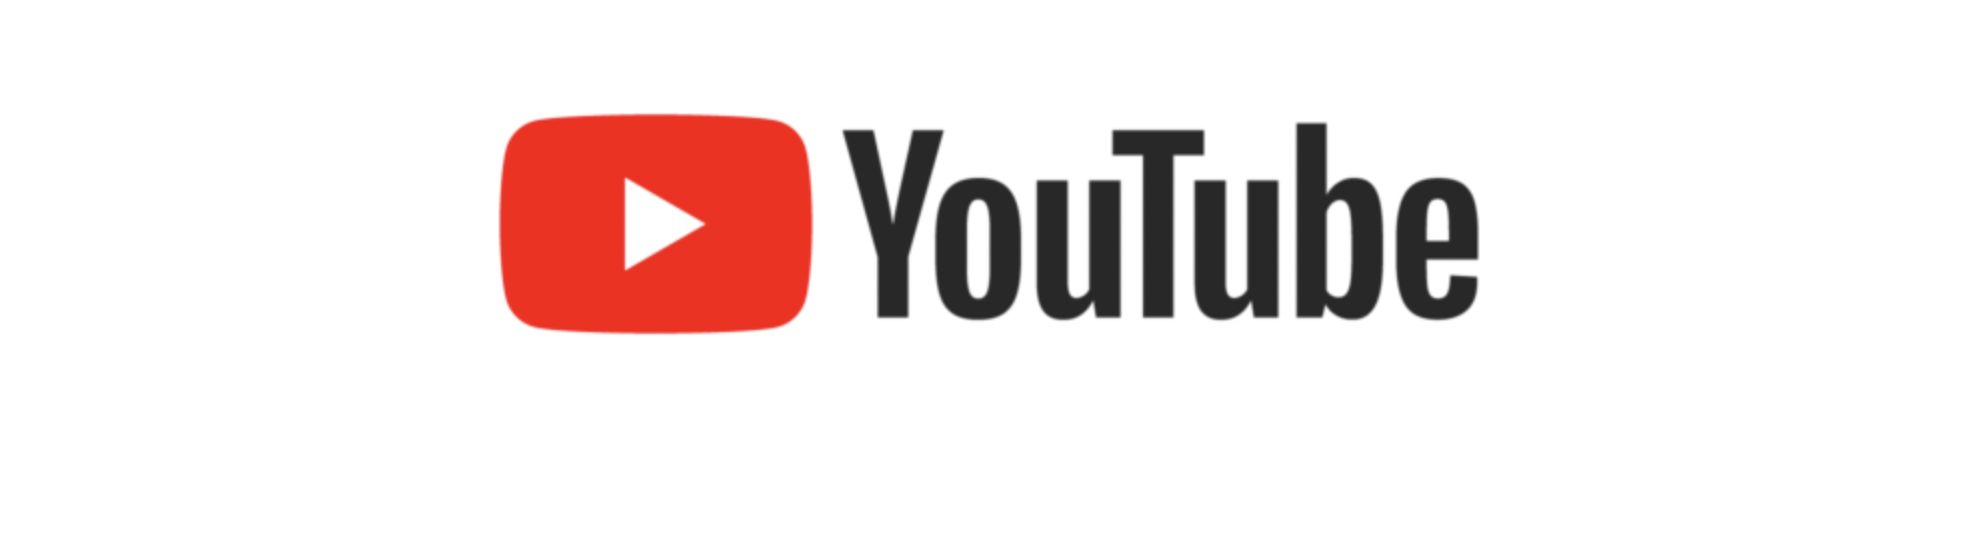 YouTube Pays $6 Billion In 12 Months to the Music Industry ...